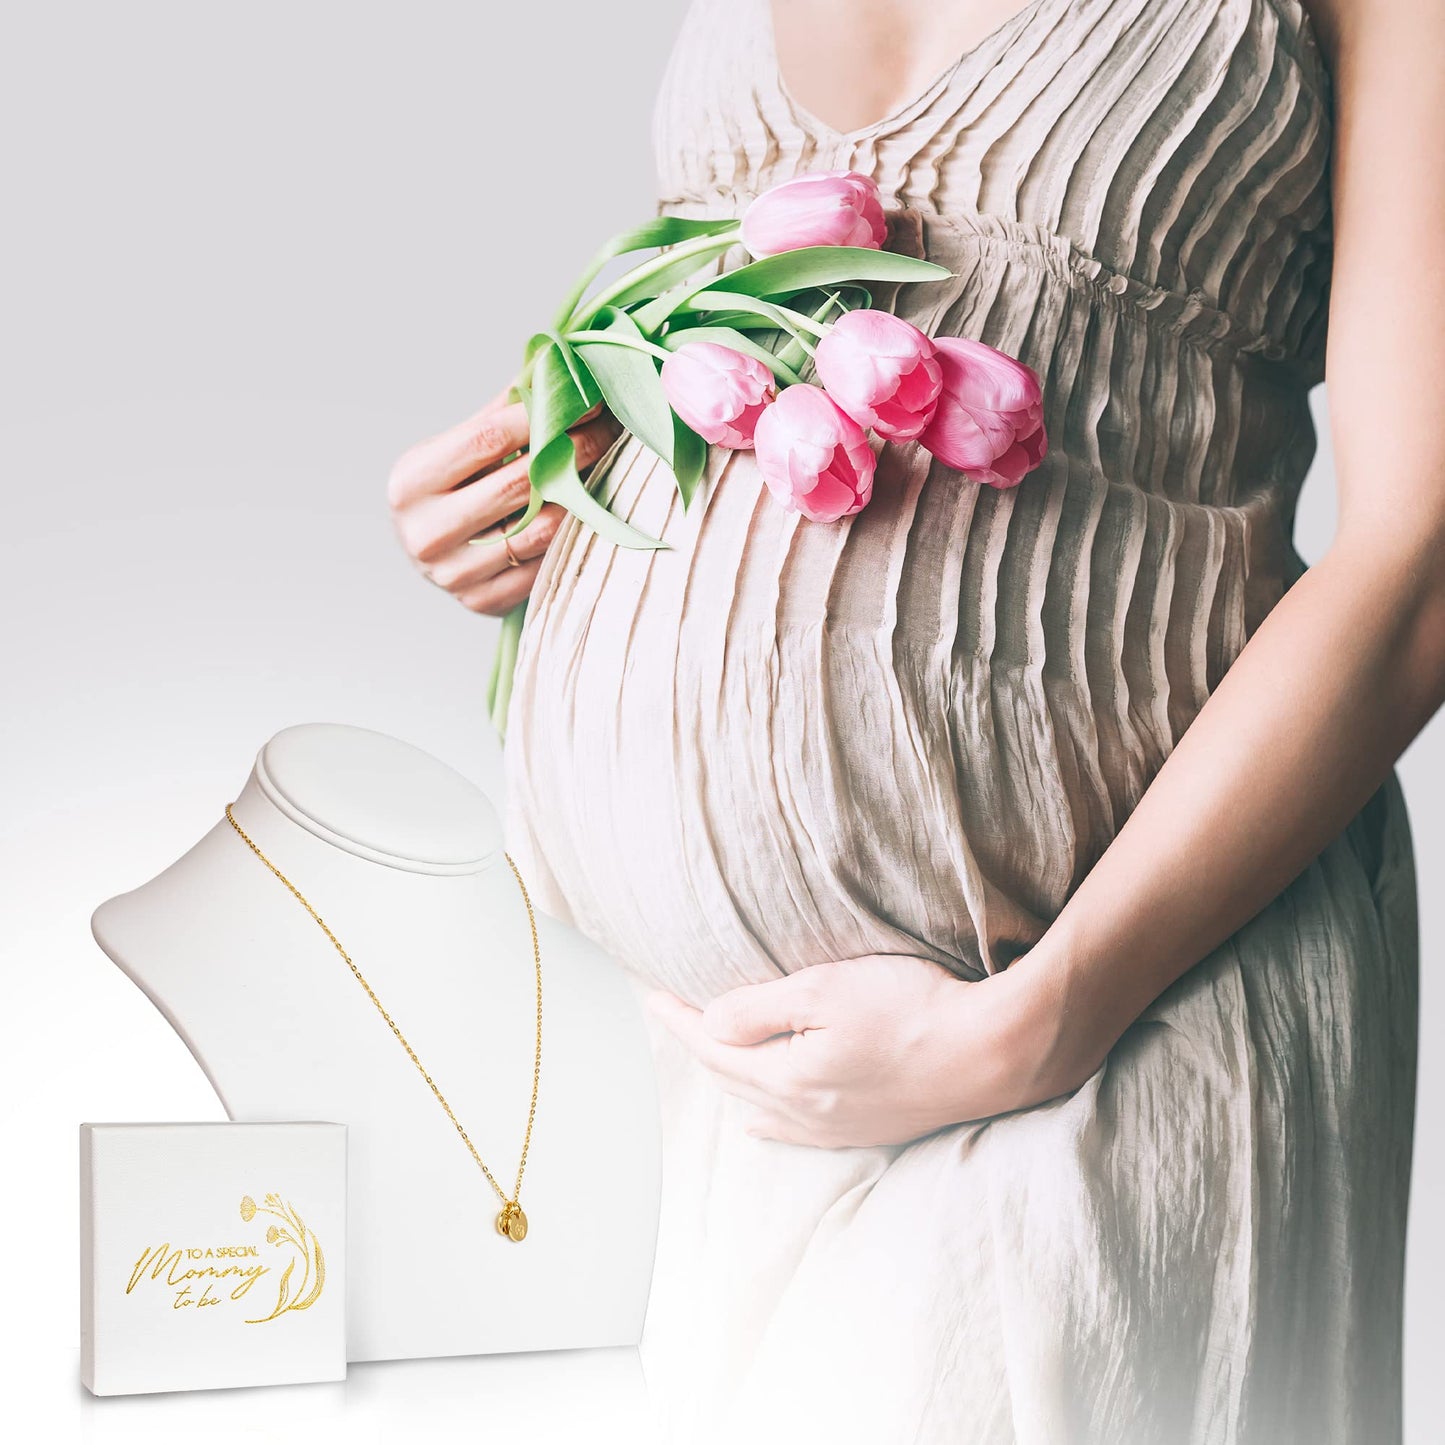 Beautiful Necklace For The First Time Mom to Be - Unique 14k Gold Dipped Pregnancy Gift For The Expecting Mommy to Be - Beautiful Sterling Silver Necklace For Women That Fits Perfect to Every Outfit